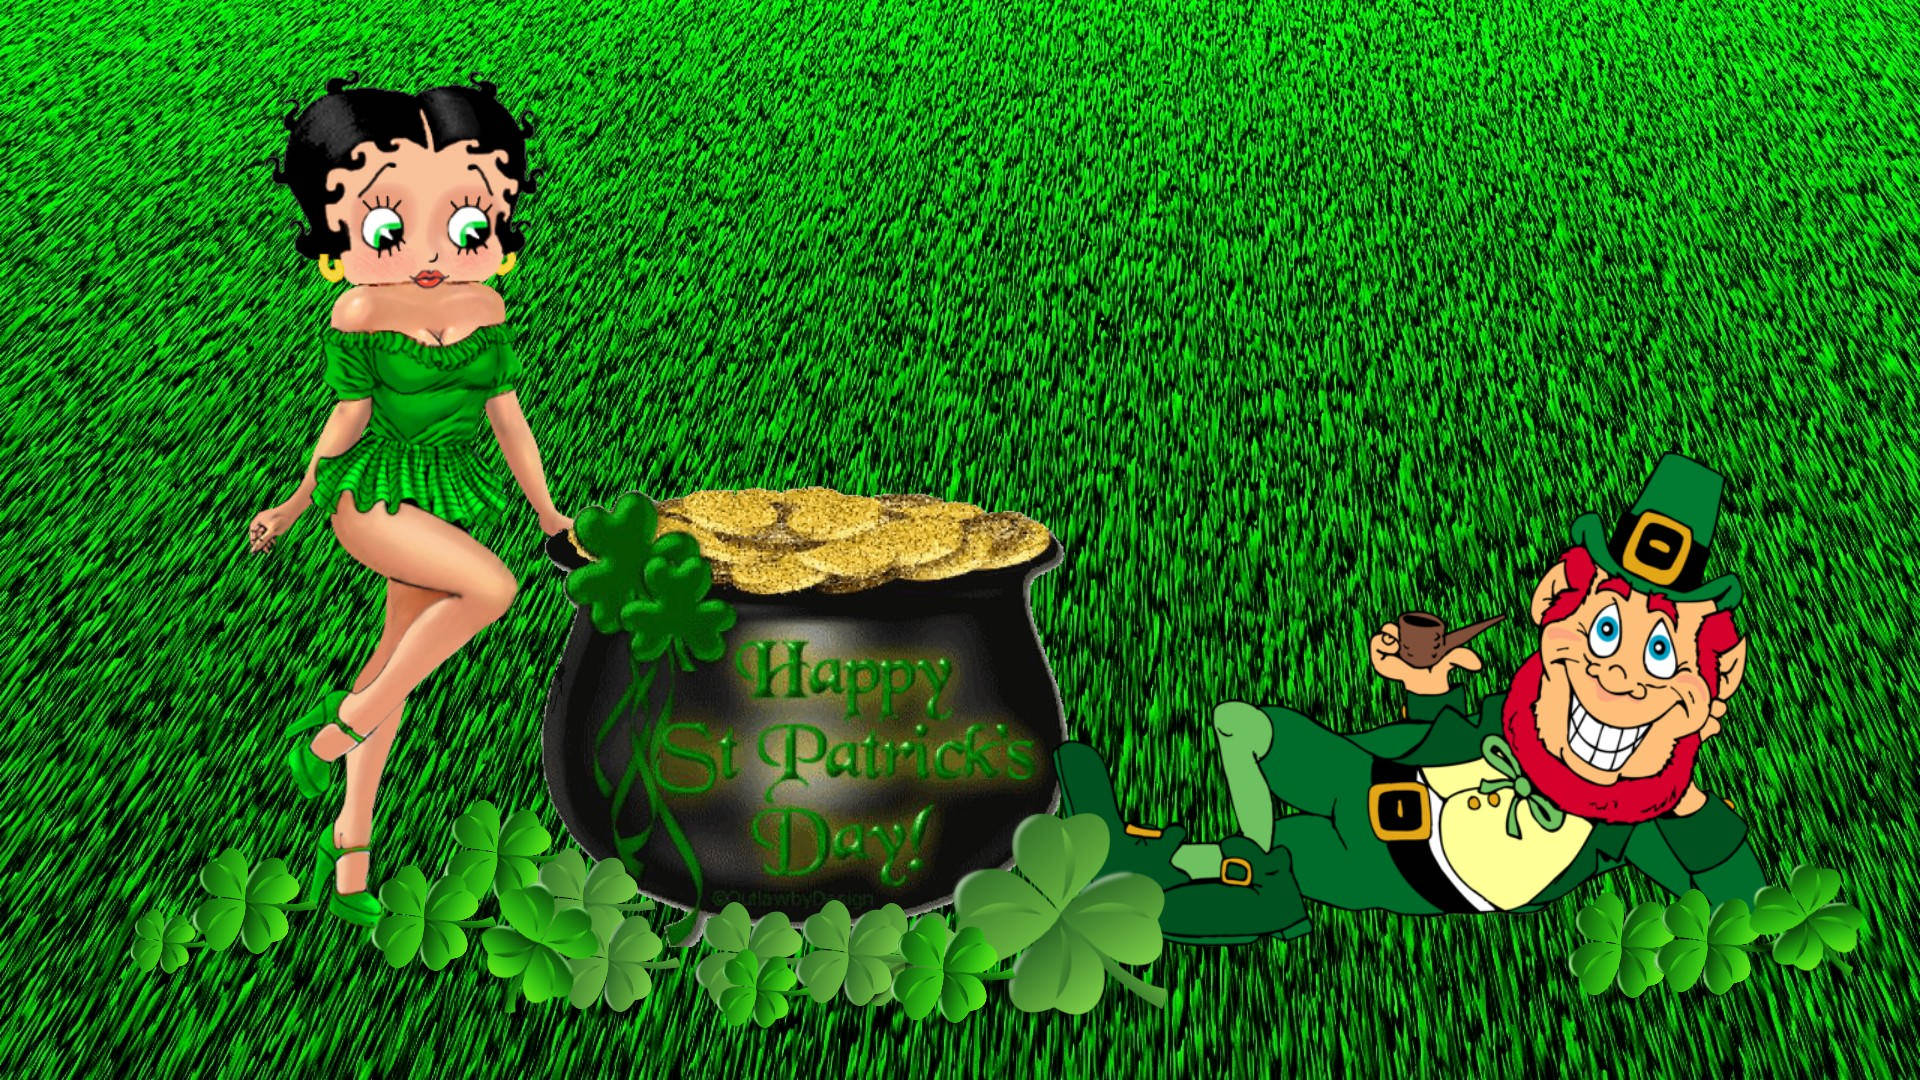 St Patrick's Day 1920X1080 Wallpaper and Background Image